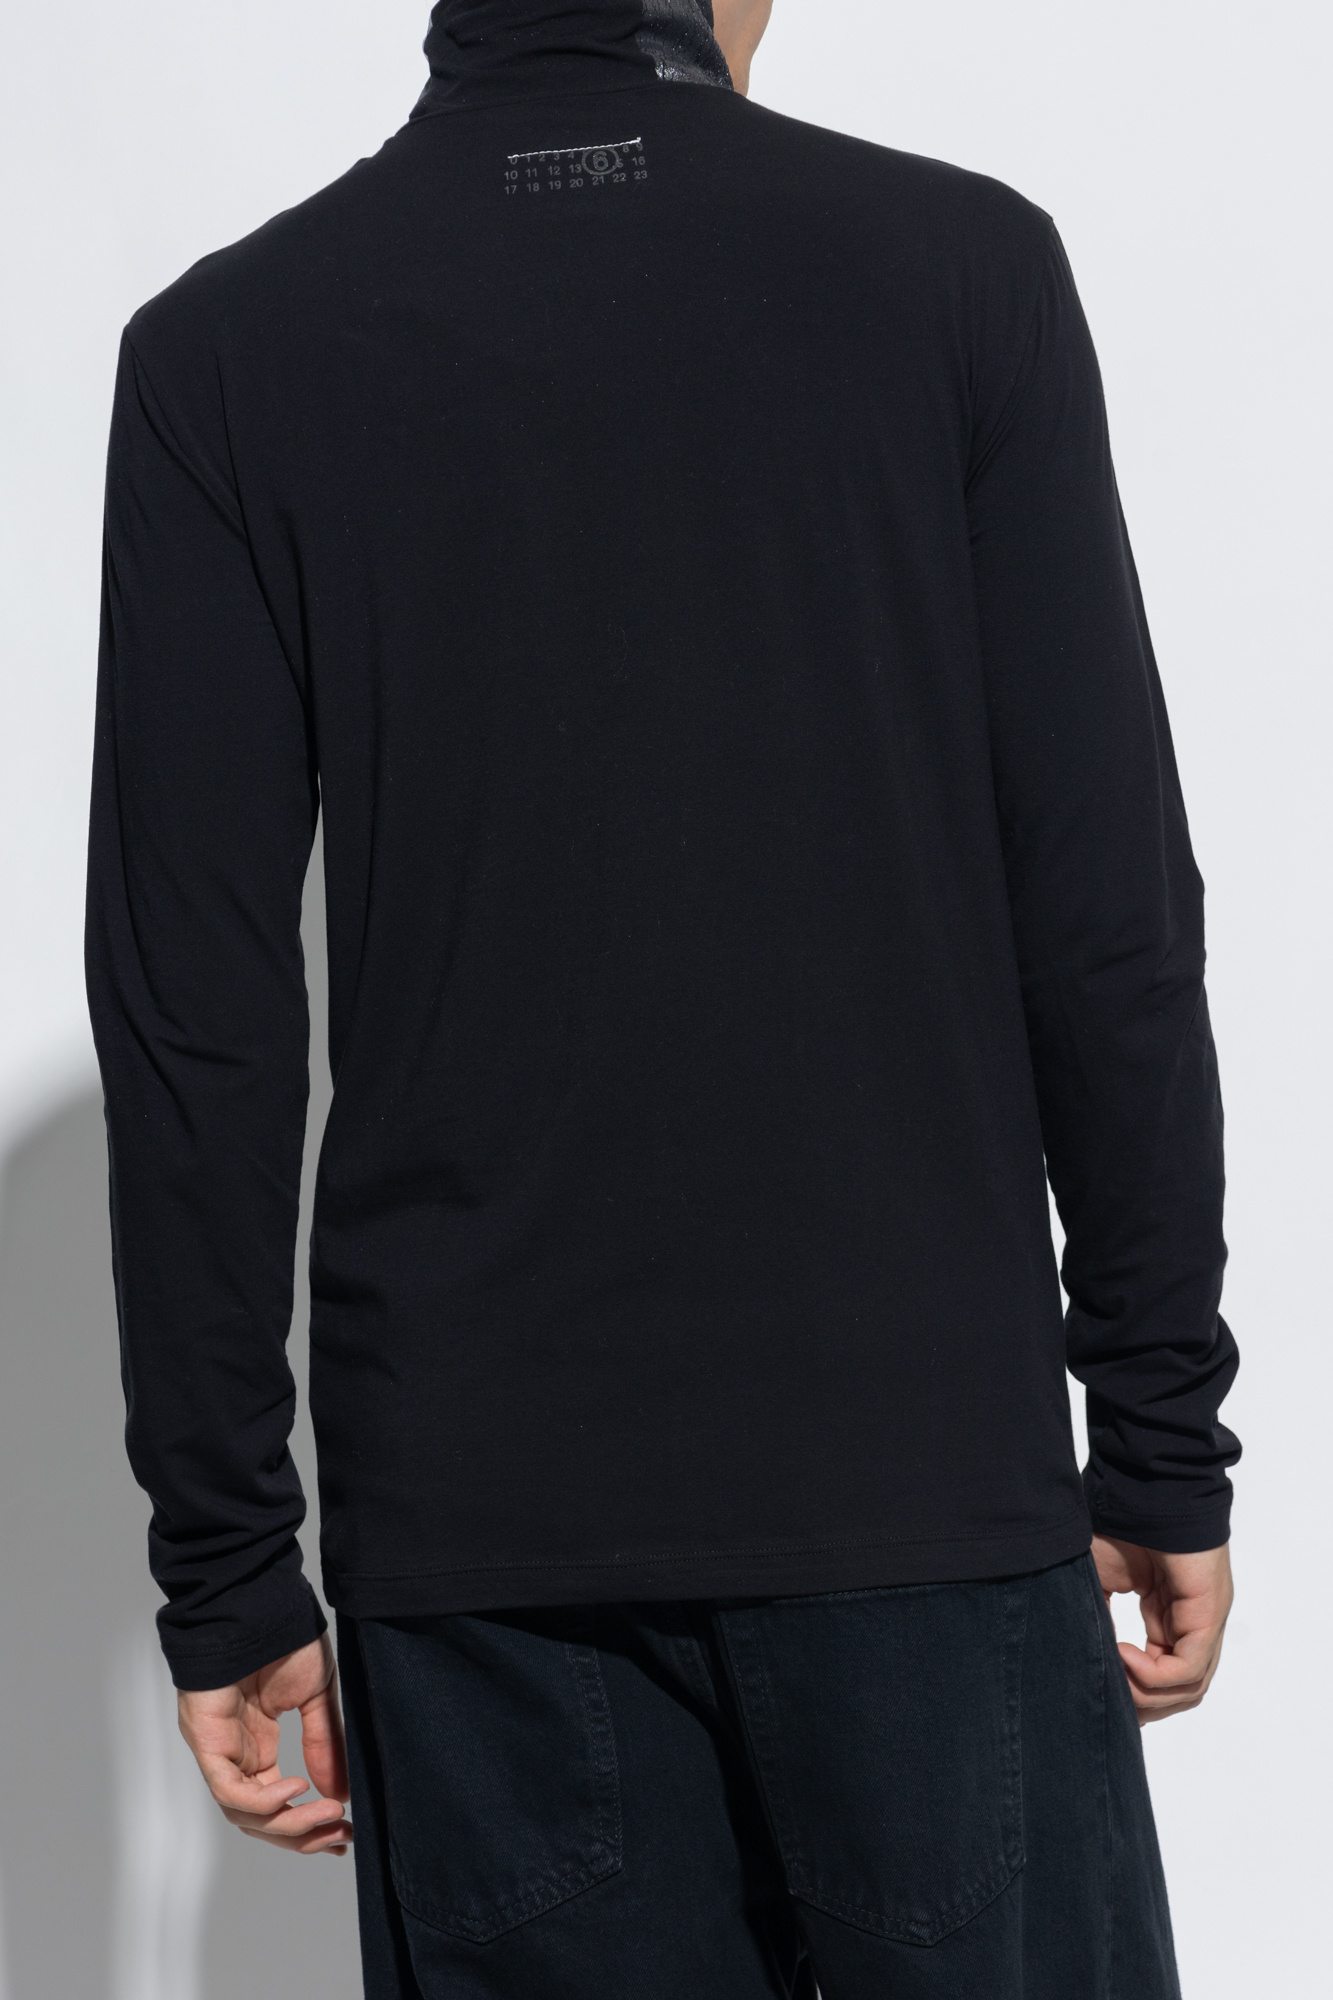 Black cotton blend cutout heart sweatshirt from Y Project Printed turtleneck sweater